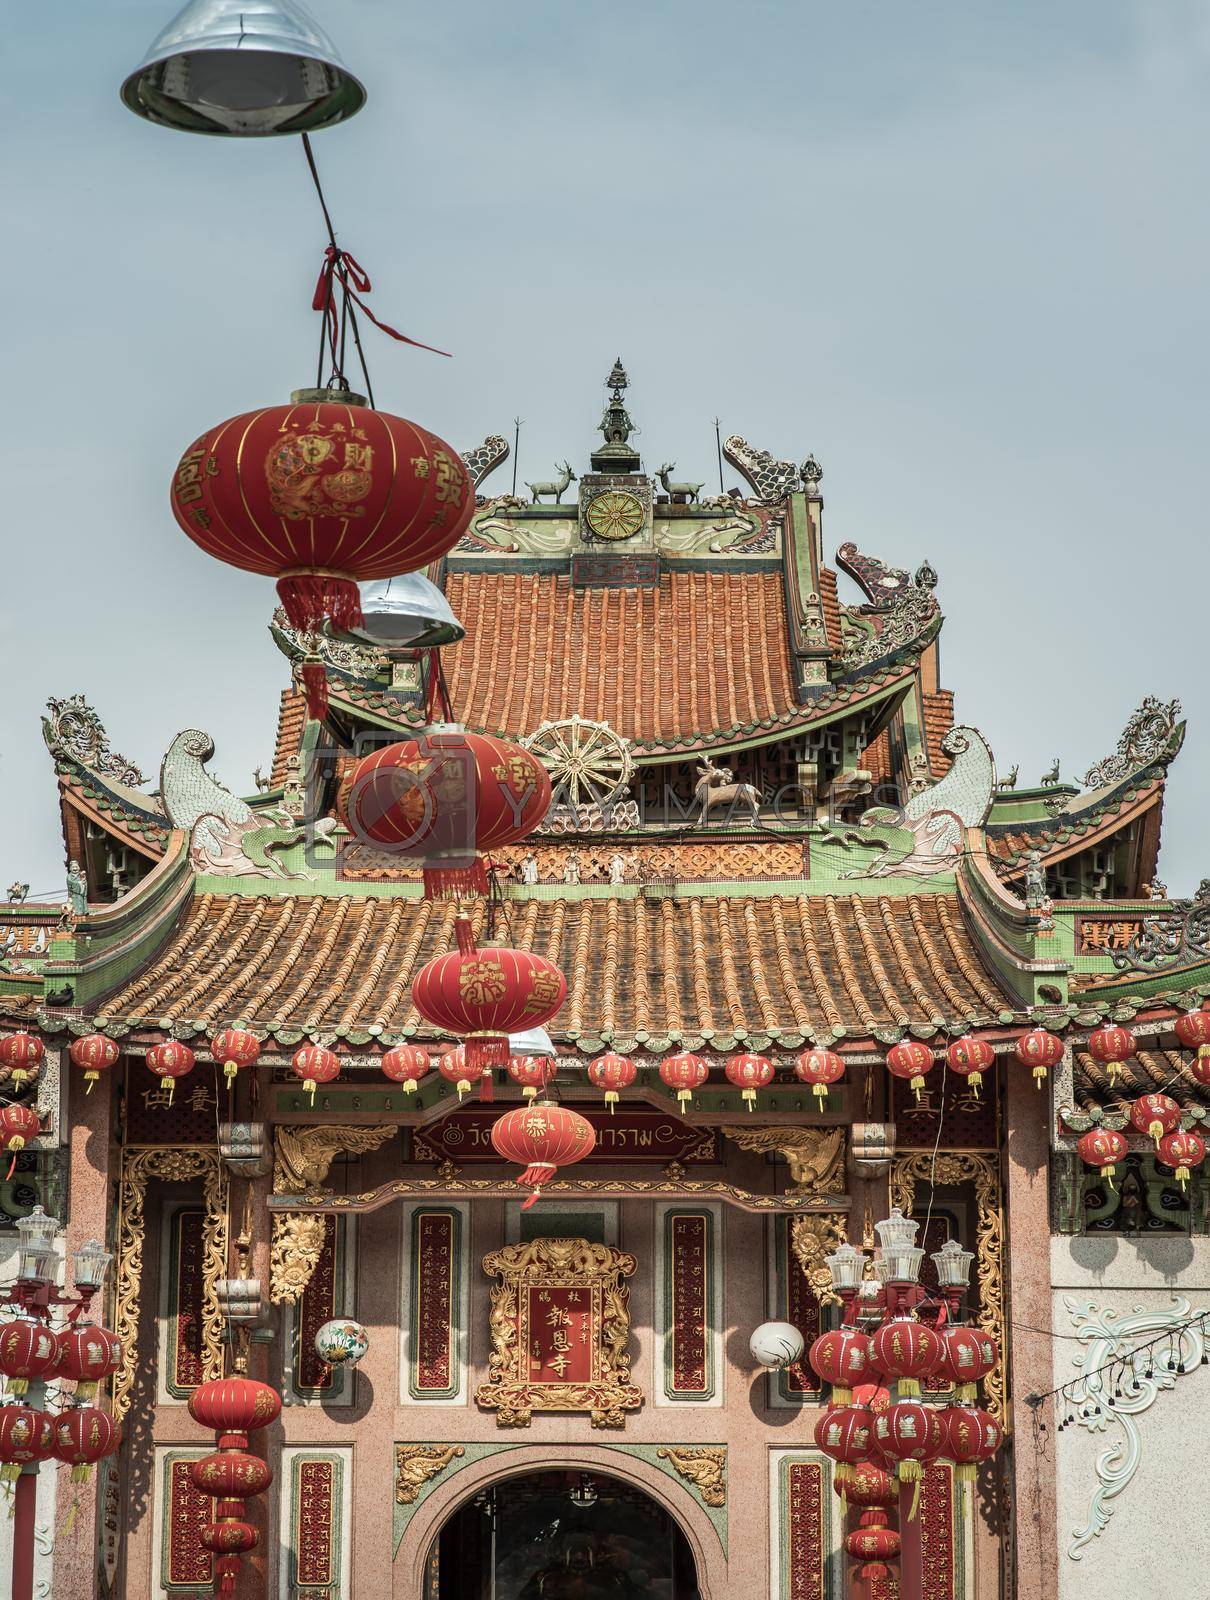 Bangkok, Thailand - Feb 10, 2020 : Architecture of chinese-style temple in front of the Wat Bhoman Khunaram (Bhoman Khunaram Temple). Selective focus.